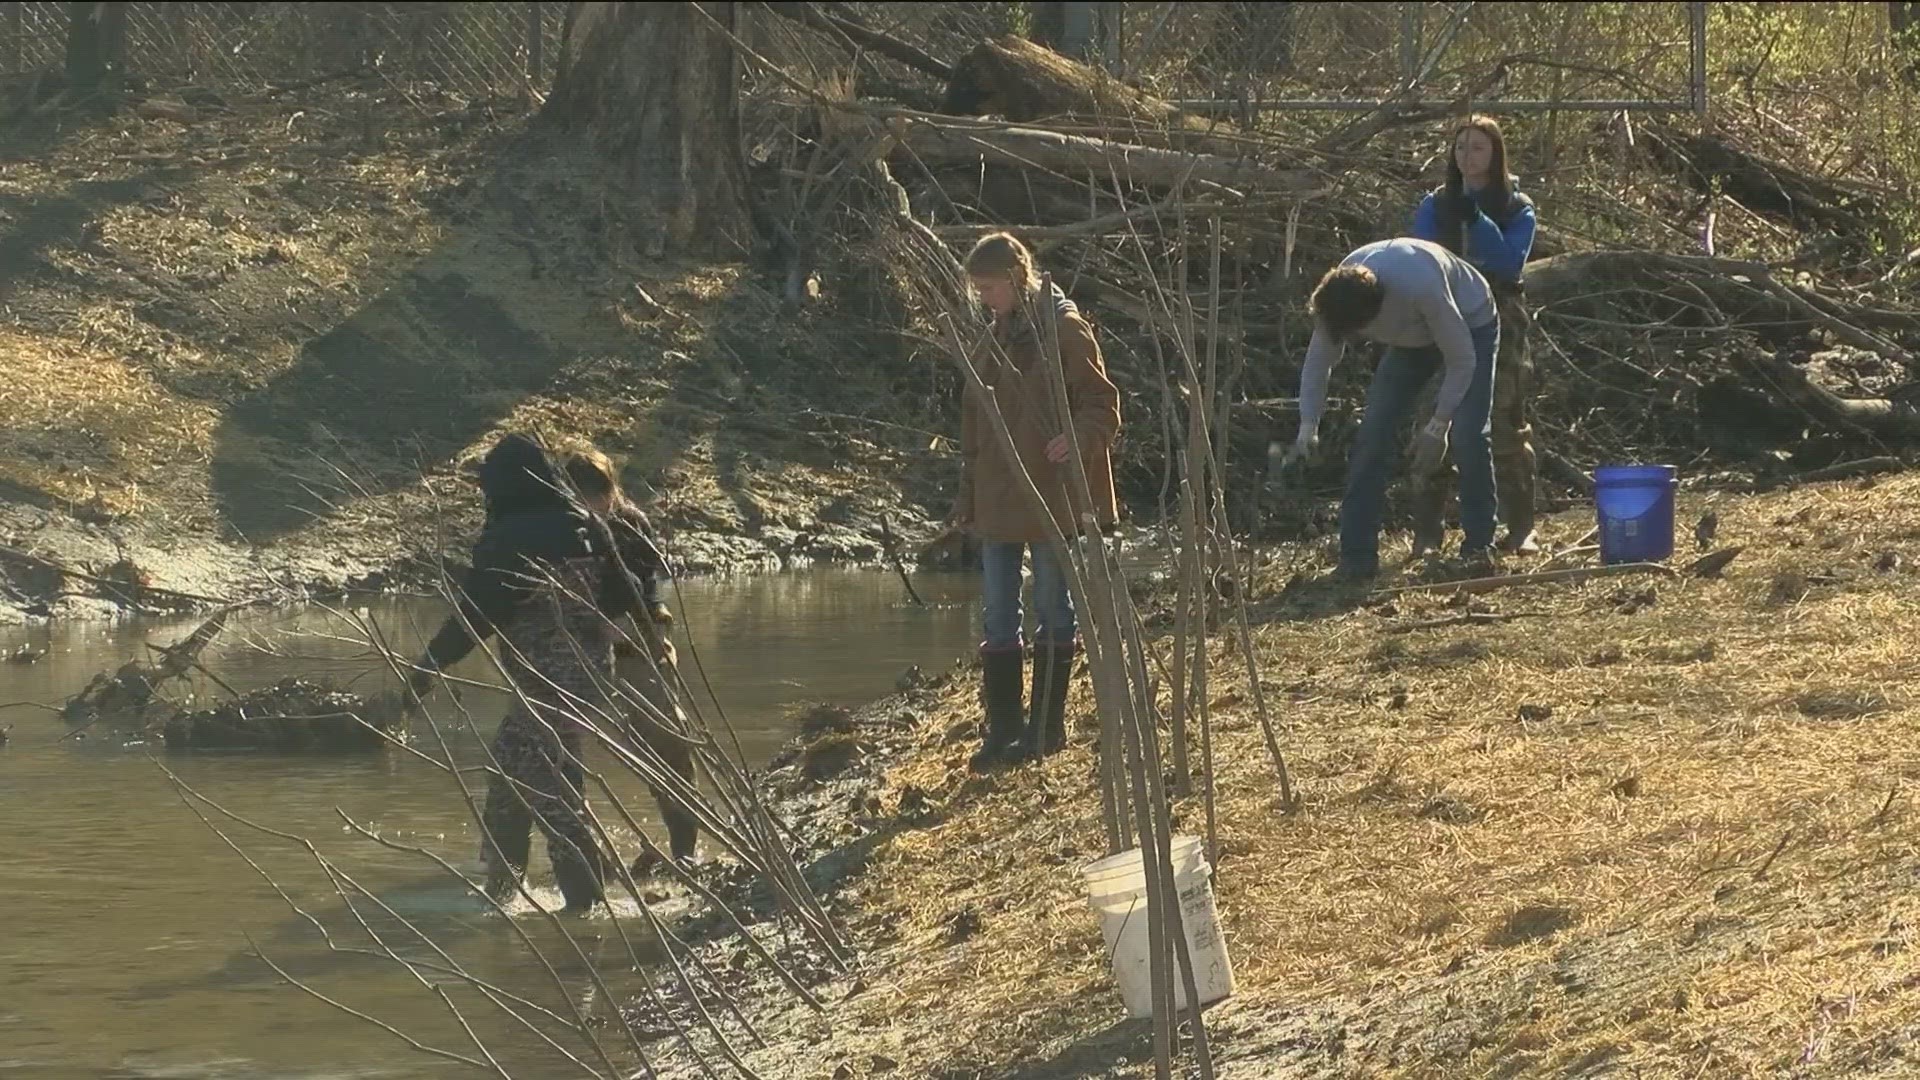 Students from Toledo Technology Academy of Engineering and the Natural Science Center planted willow trees along the river bank in efforts to restore the habitat.